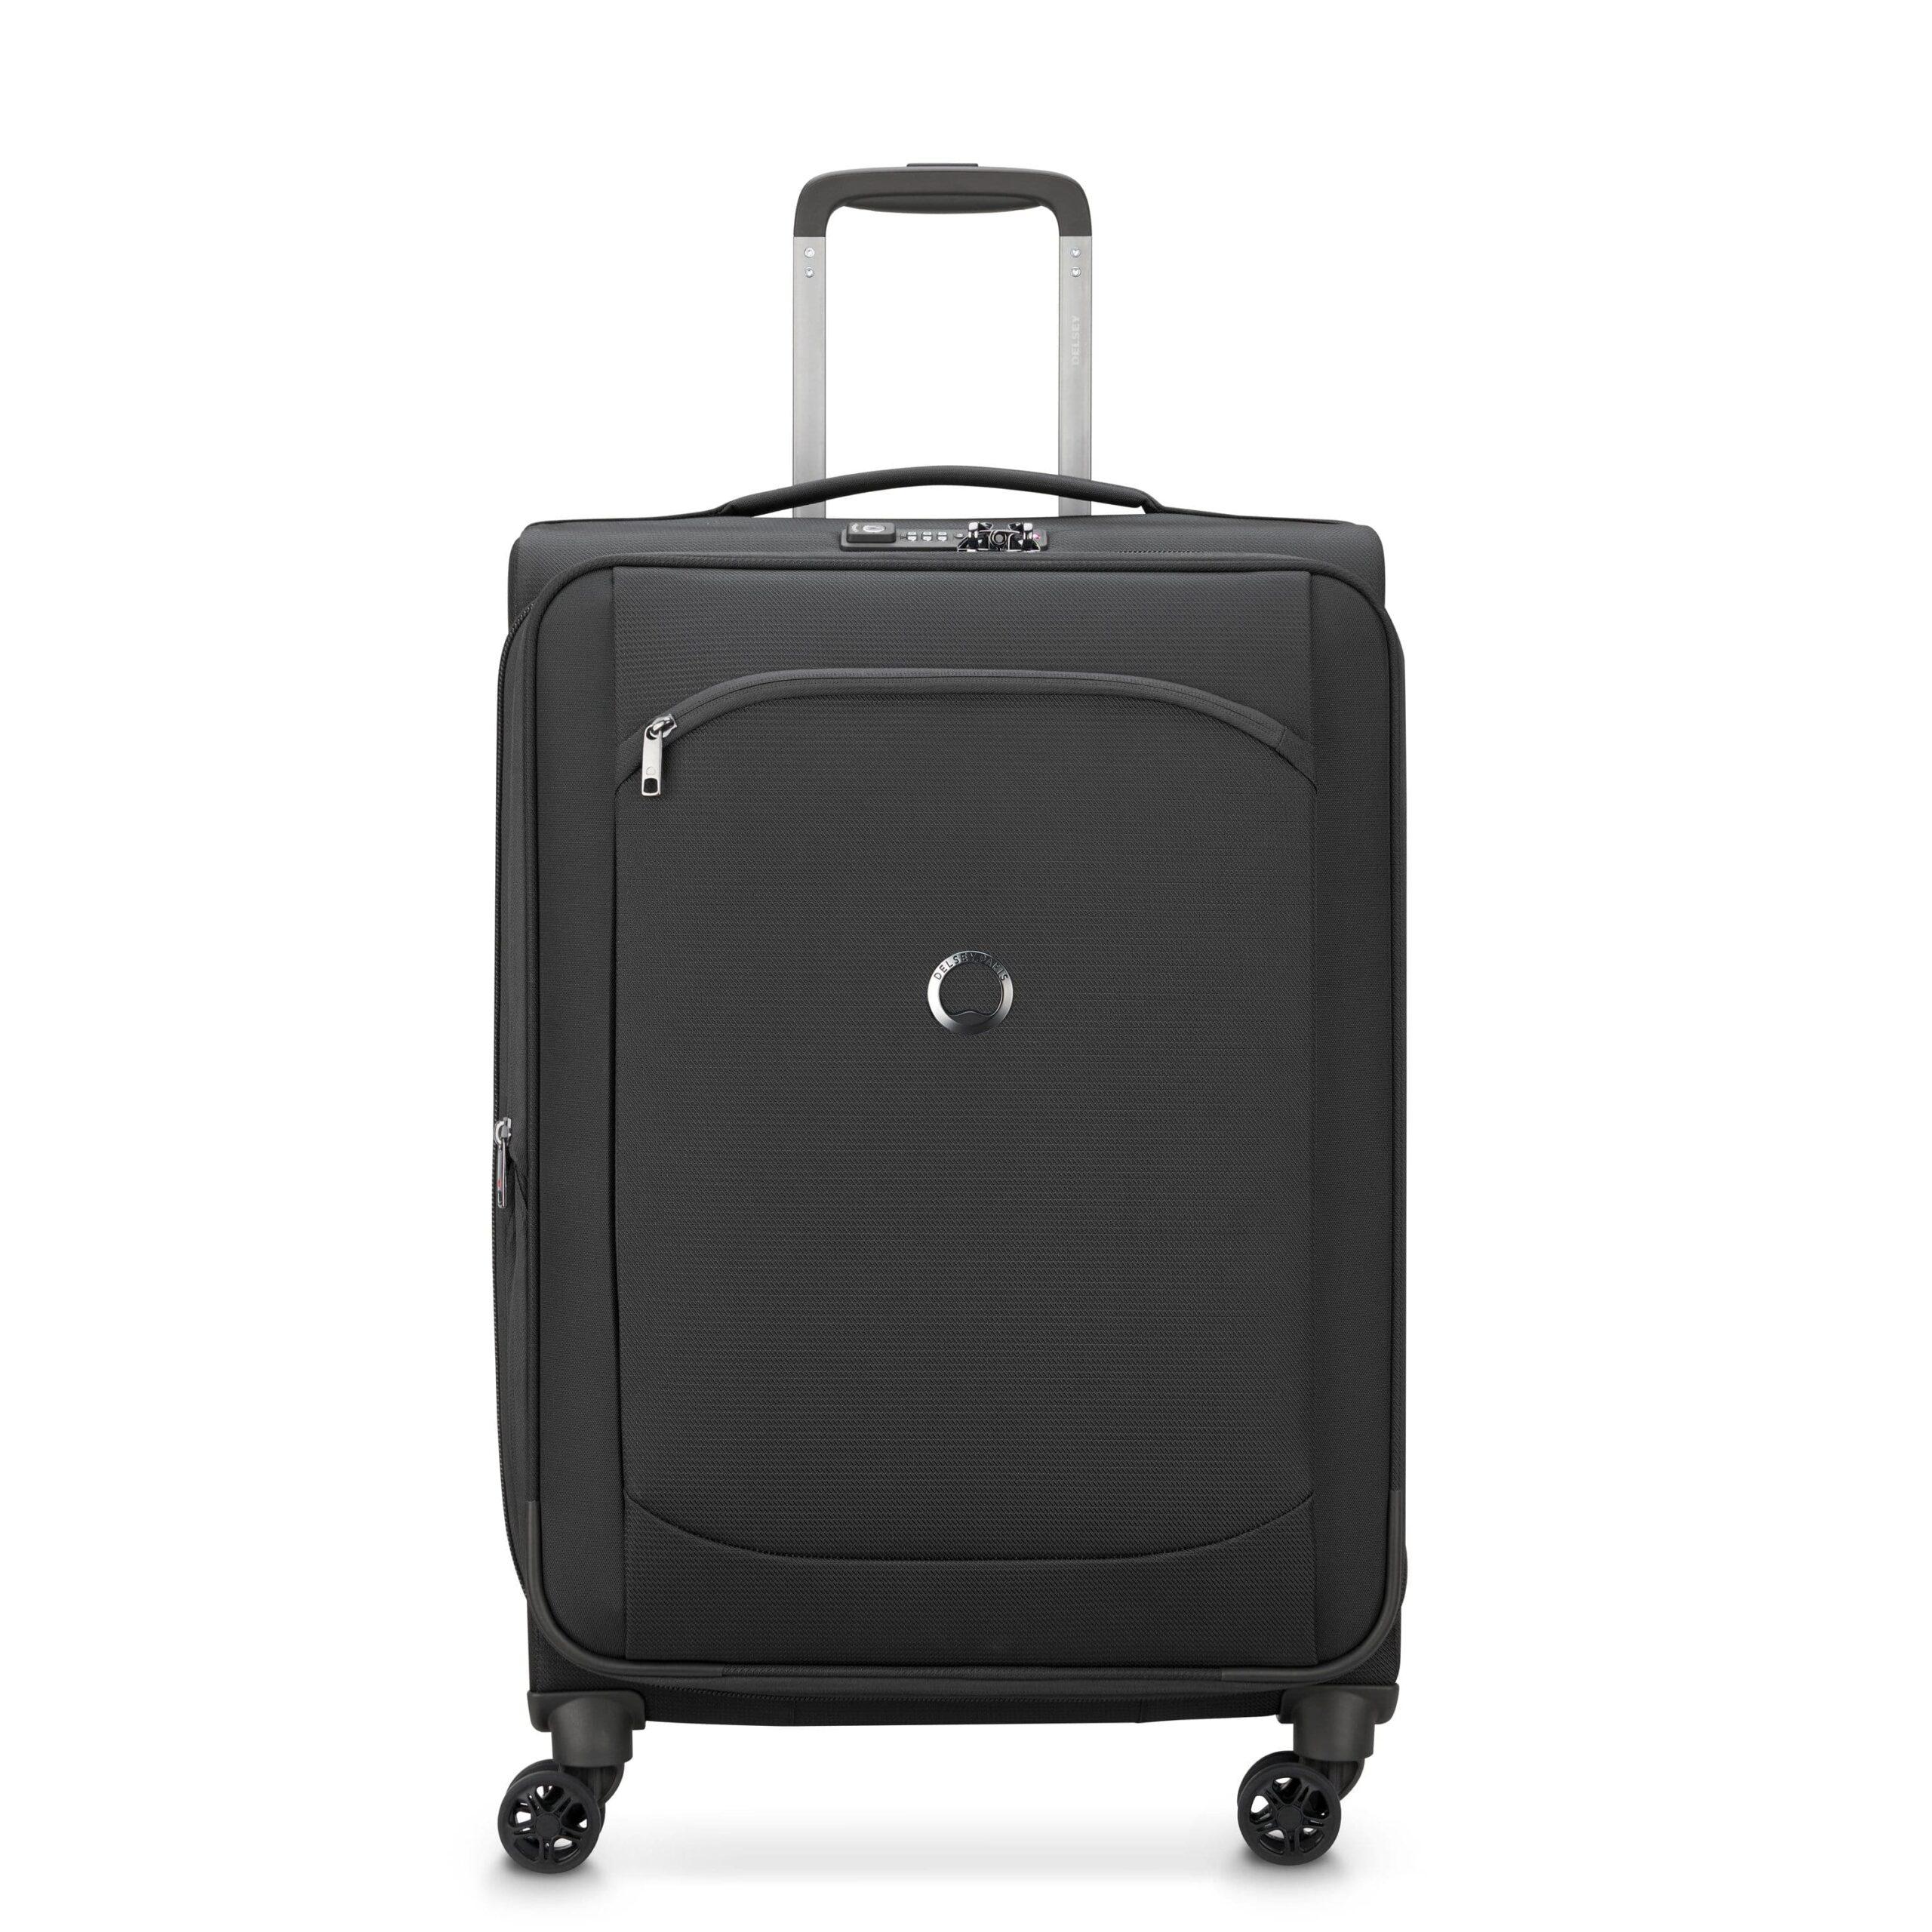 Delsey Montm Air 2.0 68cm Softcase 4 Double Wheel Expandable Check-In Luggage Trolley Black - 00235281900